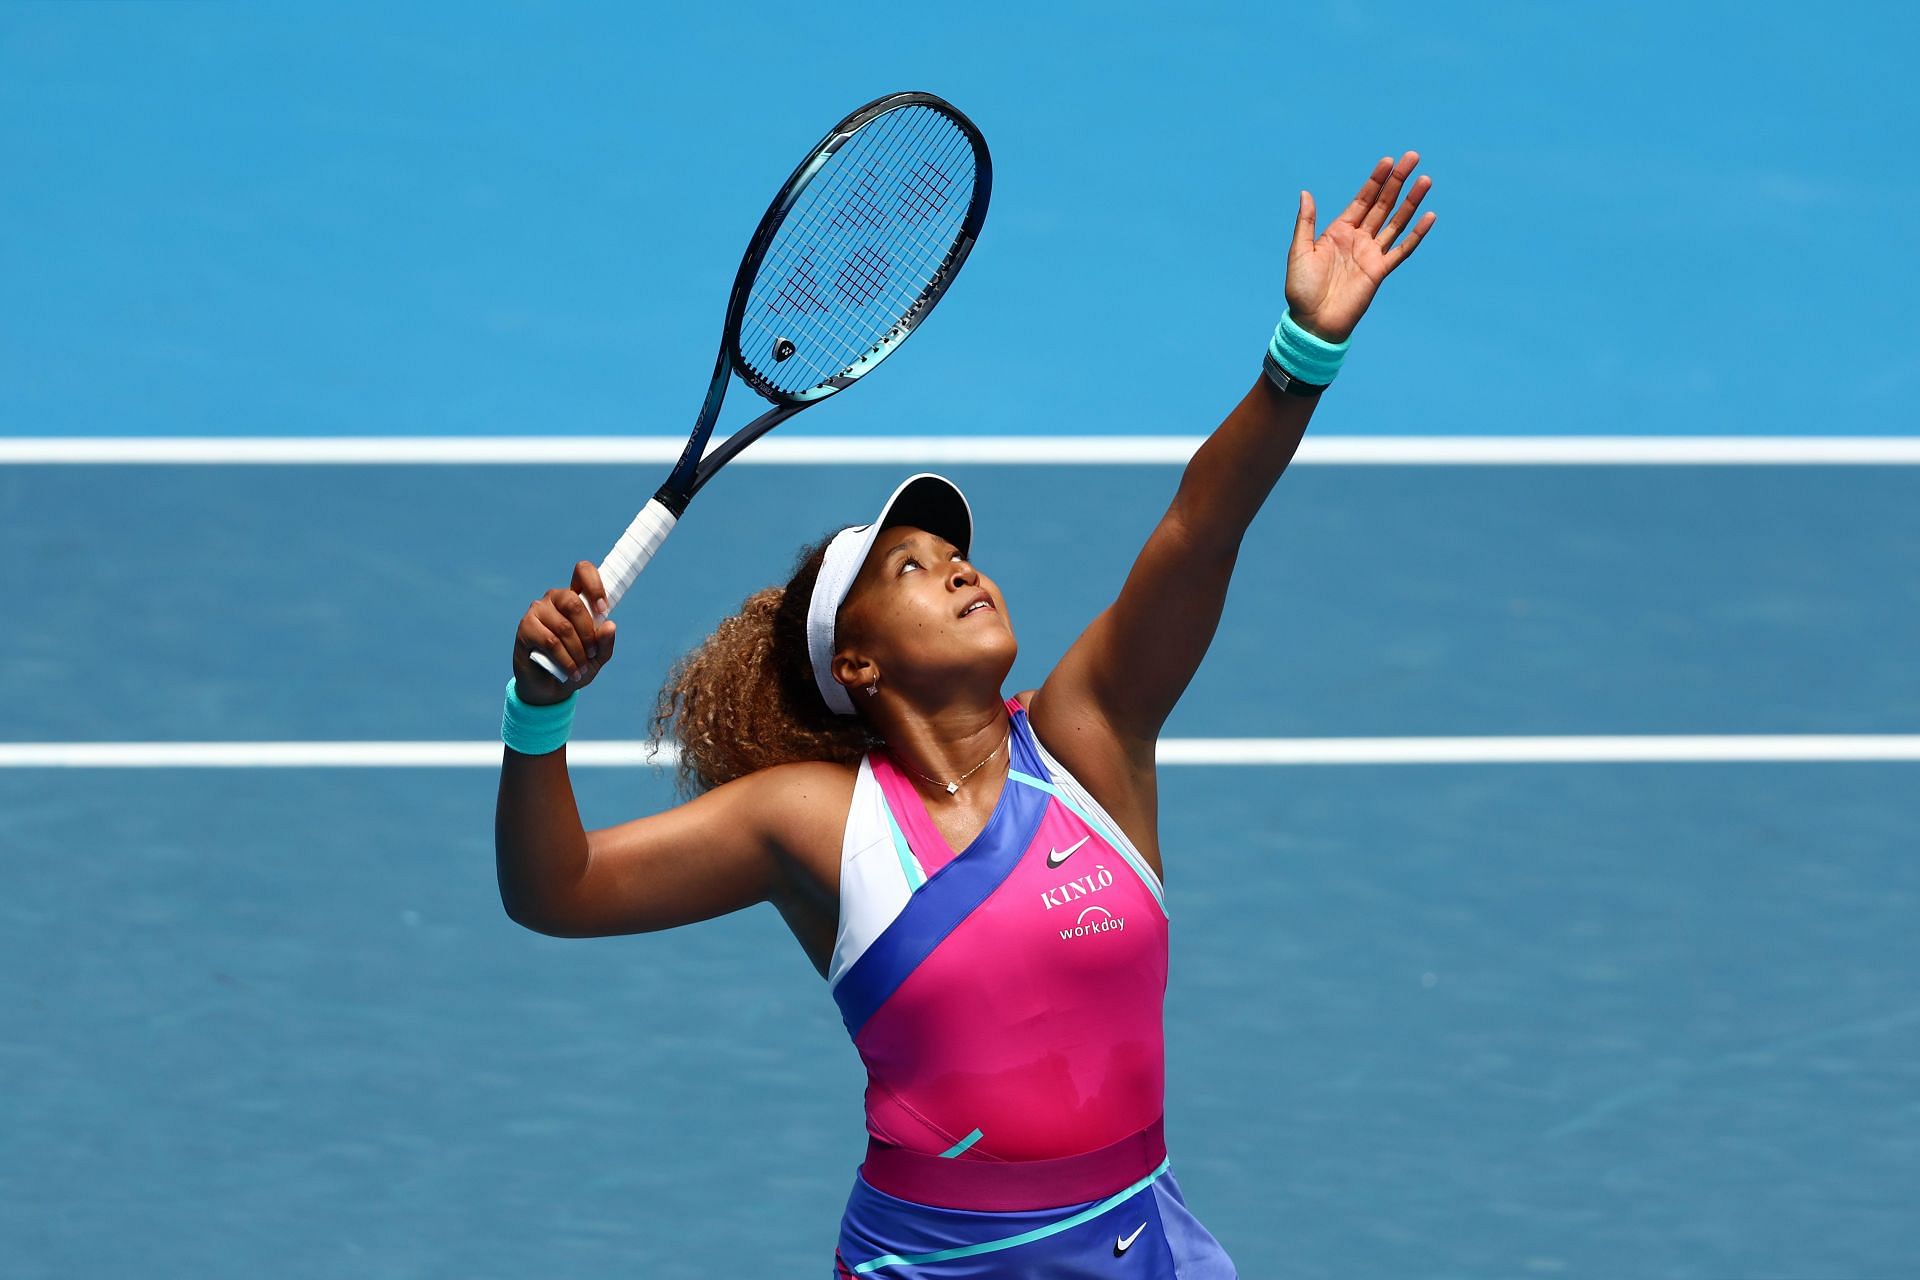 Naomi Osaka Explains The Meaning Of The Cryptic Camera Message She Posted After Australian Open